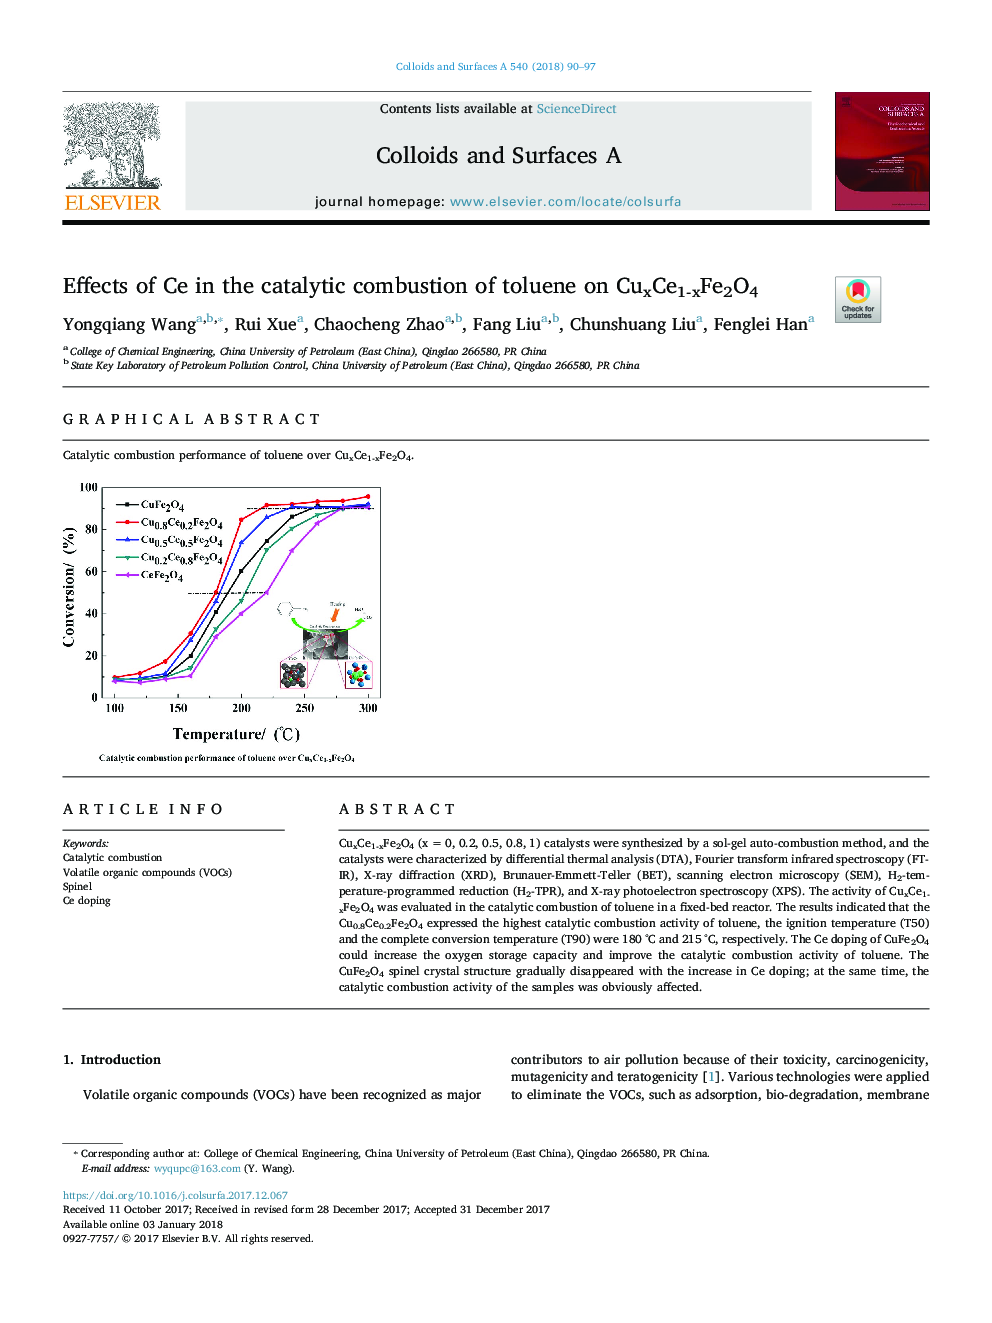 Effects of Ce in the catalytic combustion of toluene on CuxCe1-xFe2O4